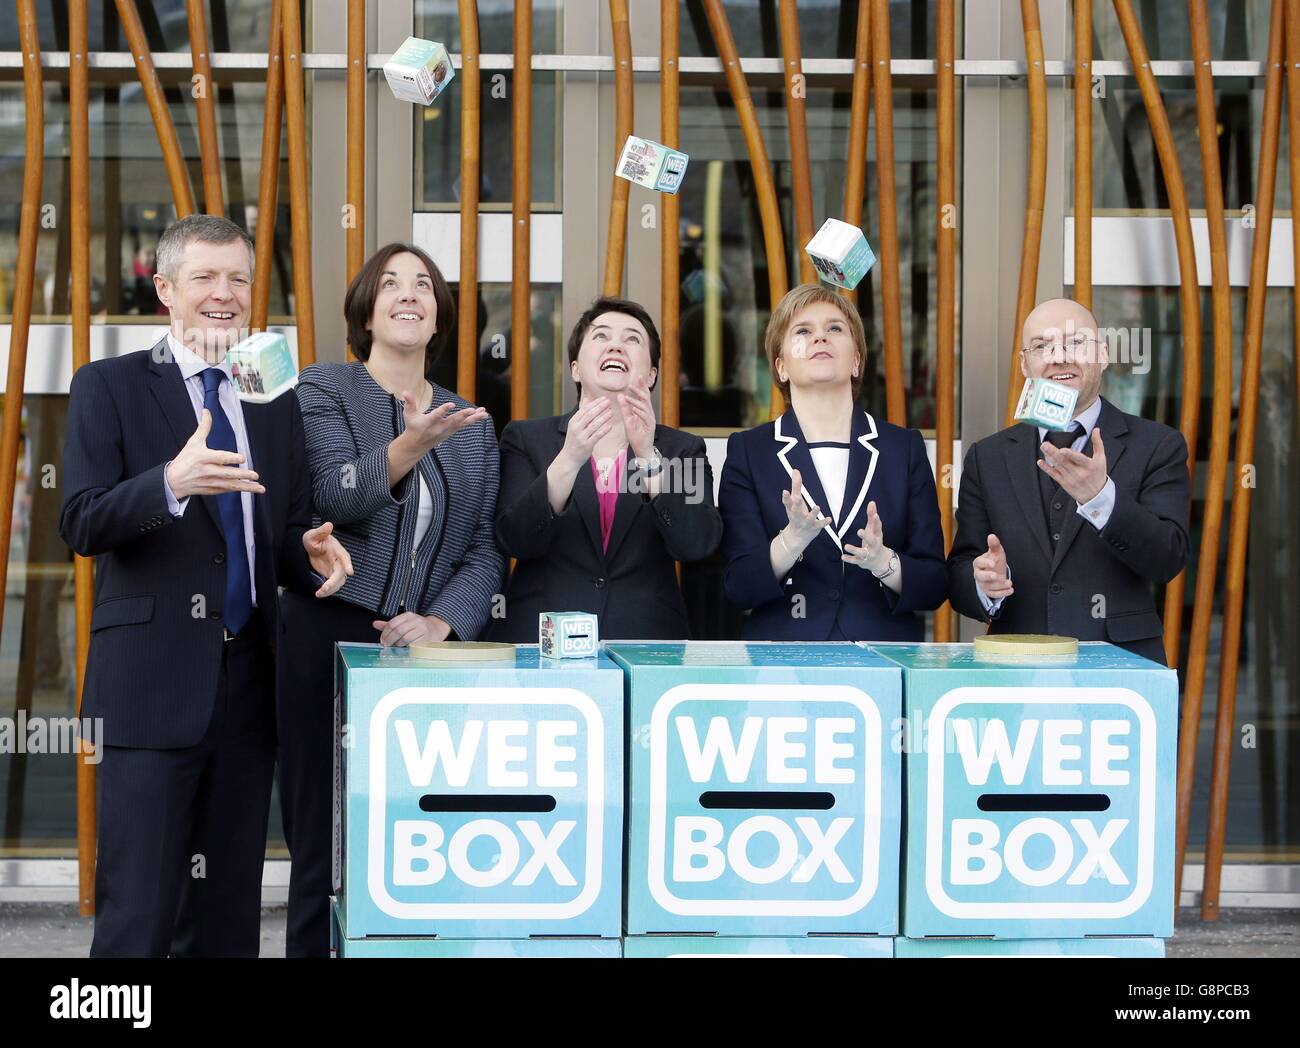 The leaders of all five main political parties in Scotland (left to right) Willie Rennie, Kezia Dugdale, Ruth Davidson, Nicola Sturgeon and Patrick Harvie, launch the annual Sciaf appeal outside the Scottish Parliament in Edinburgh. Stock Photo